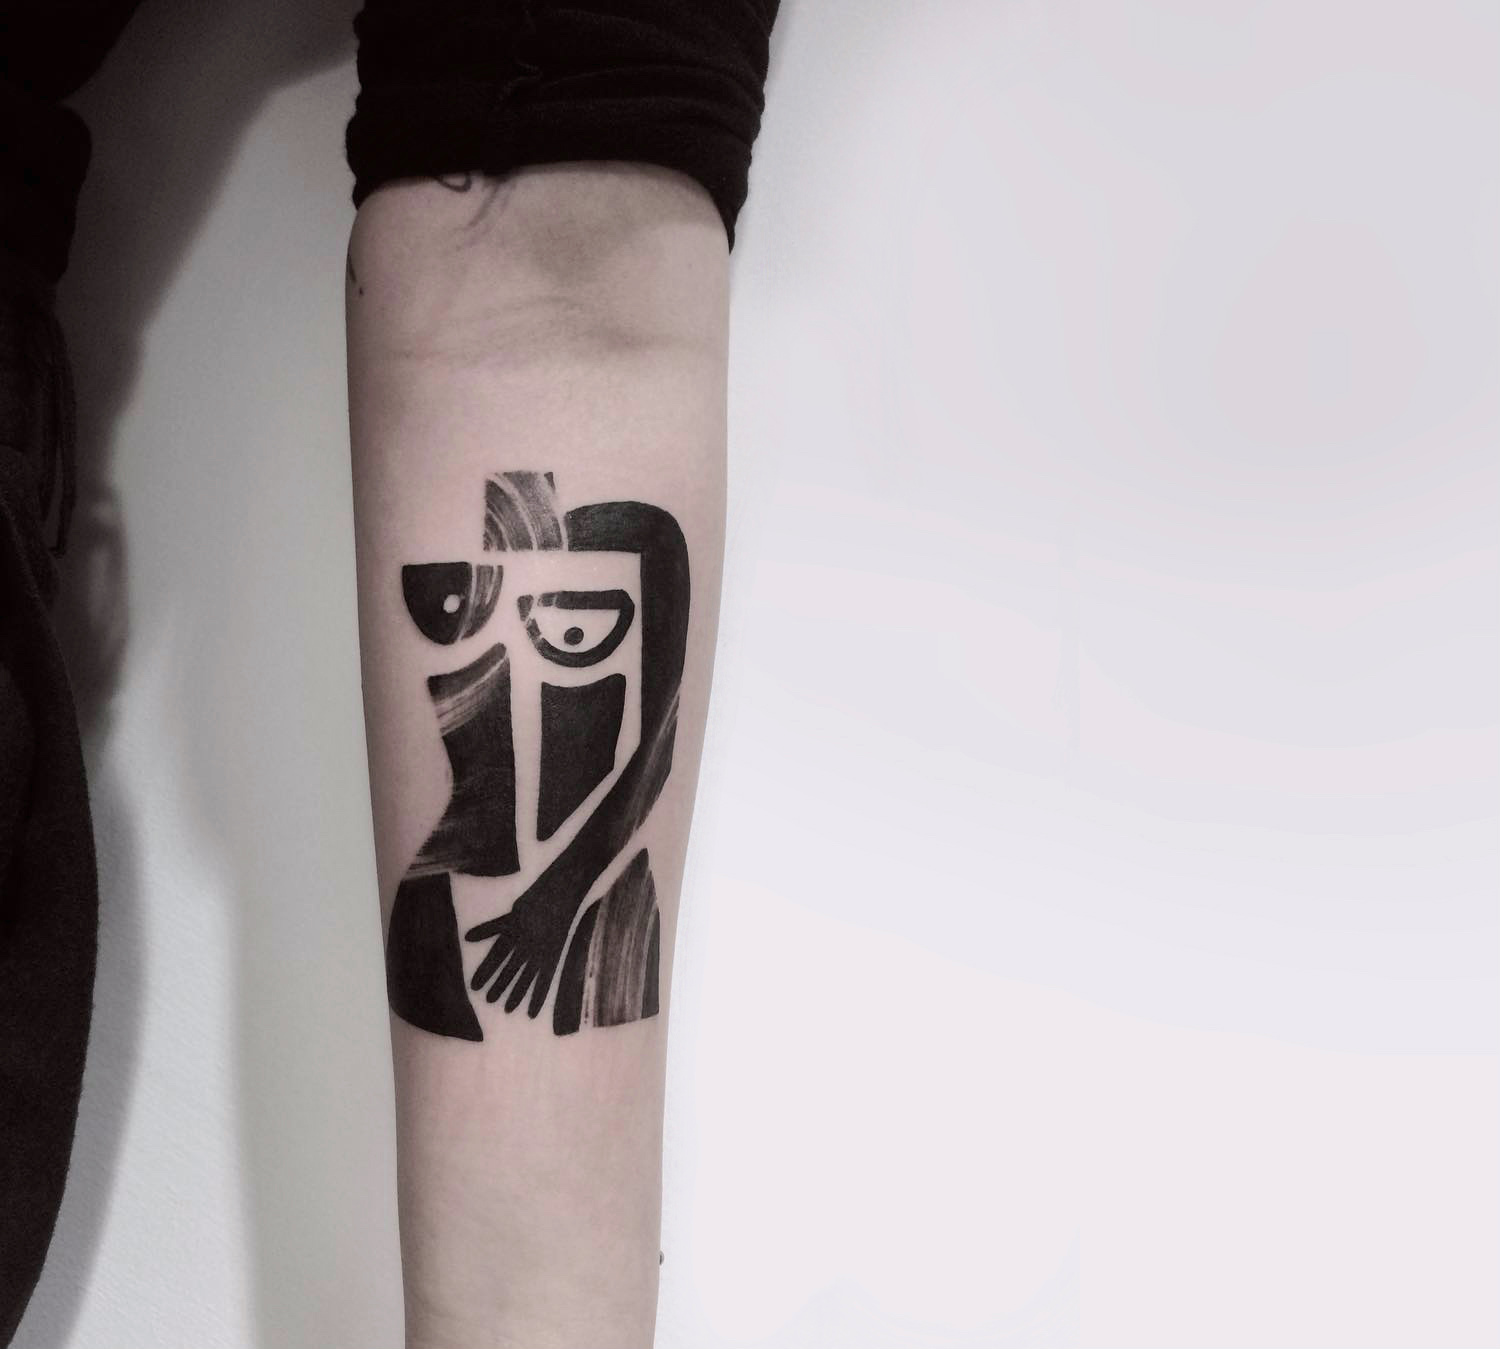 Picasso inspired figure tattoo by Viktor Gusev